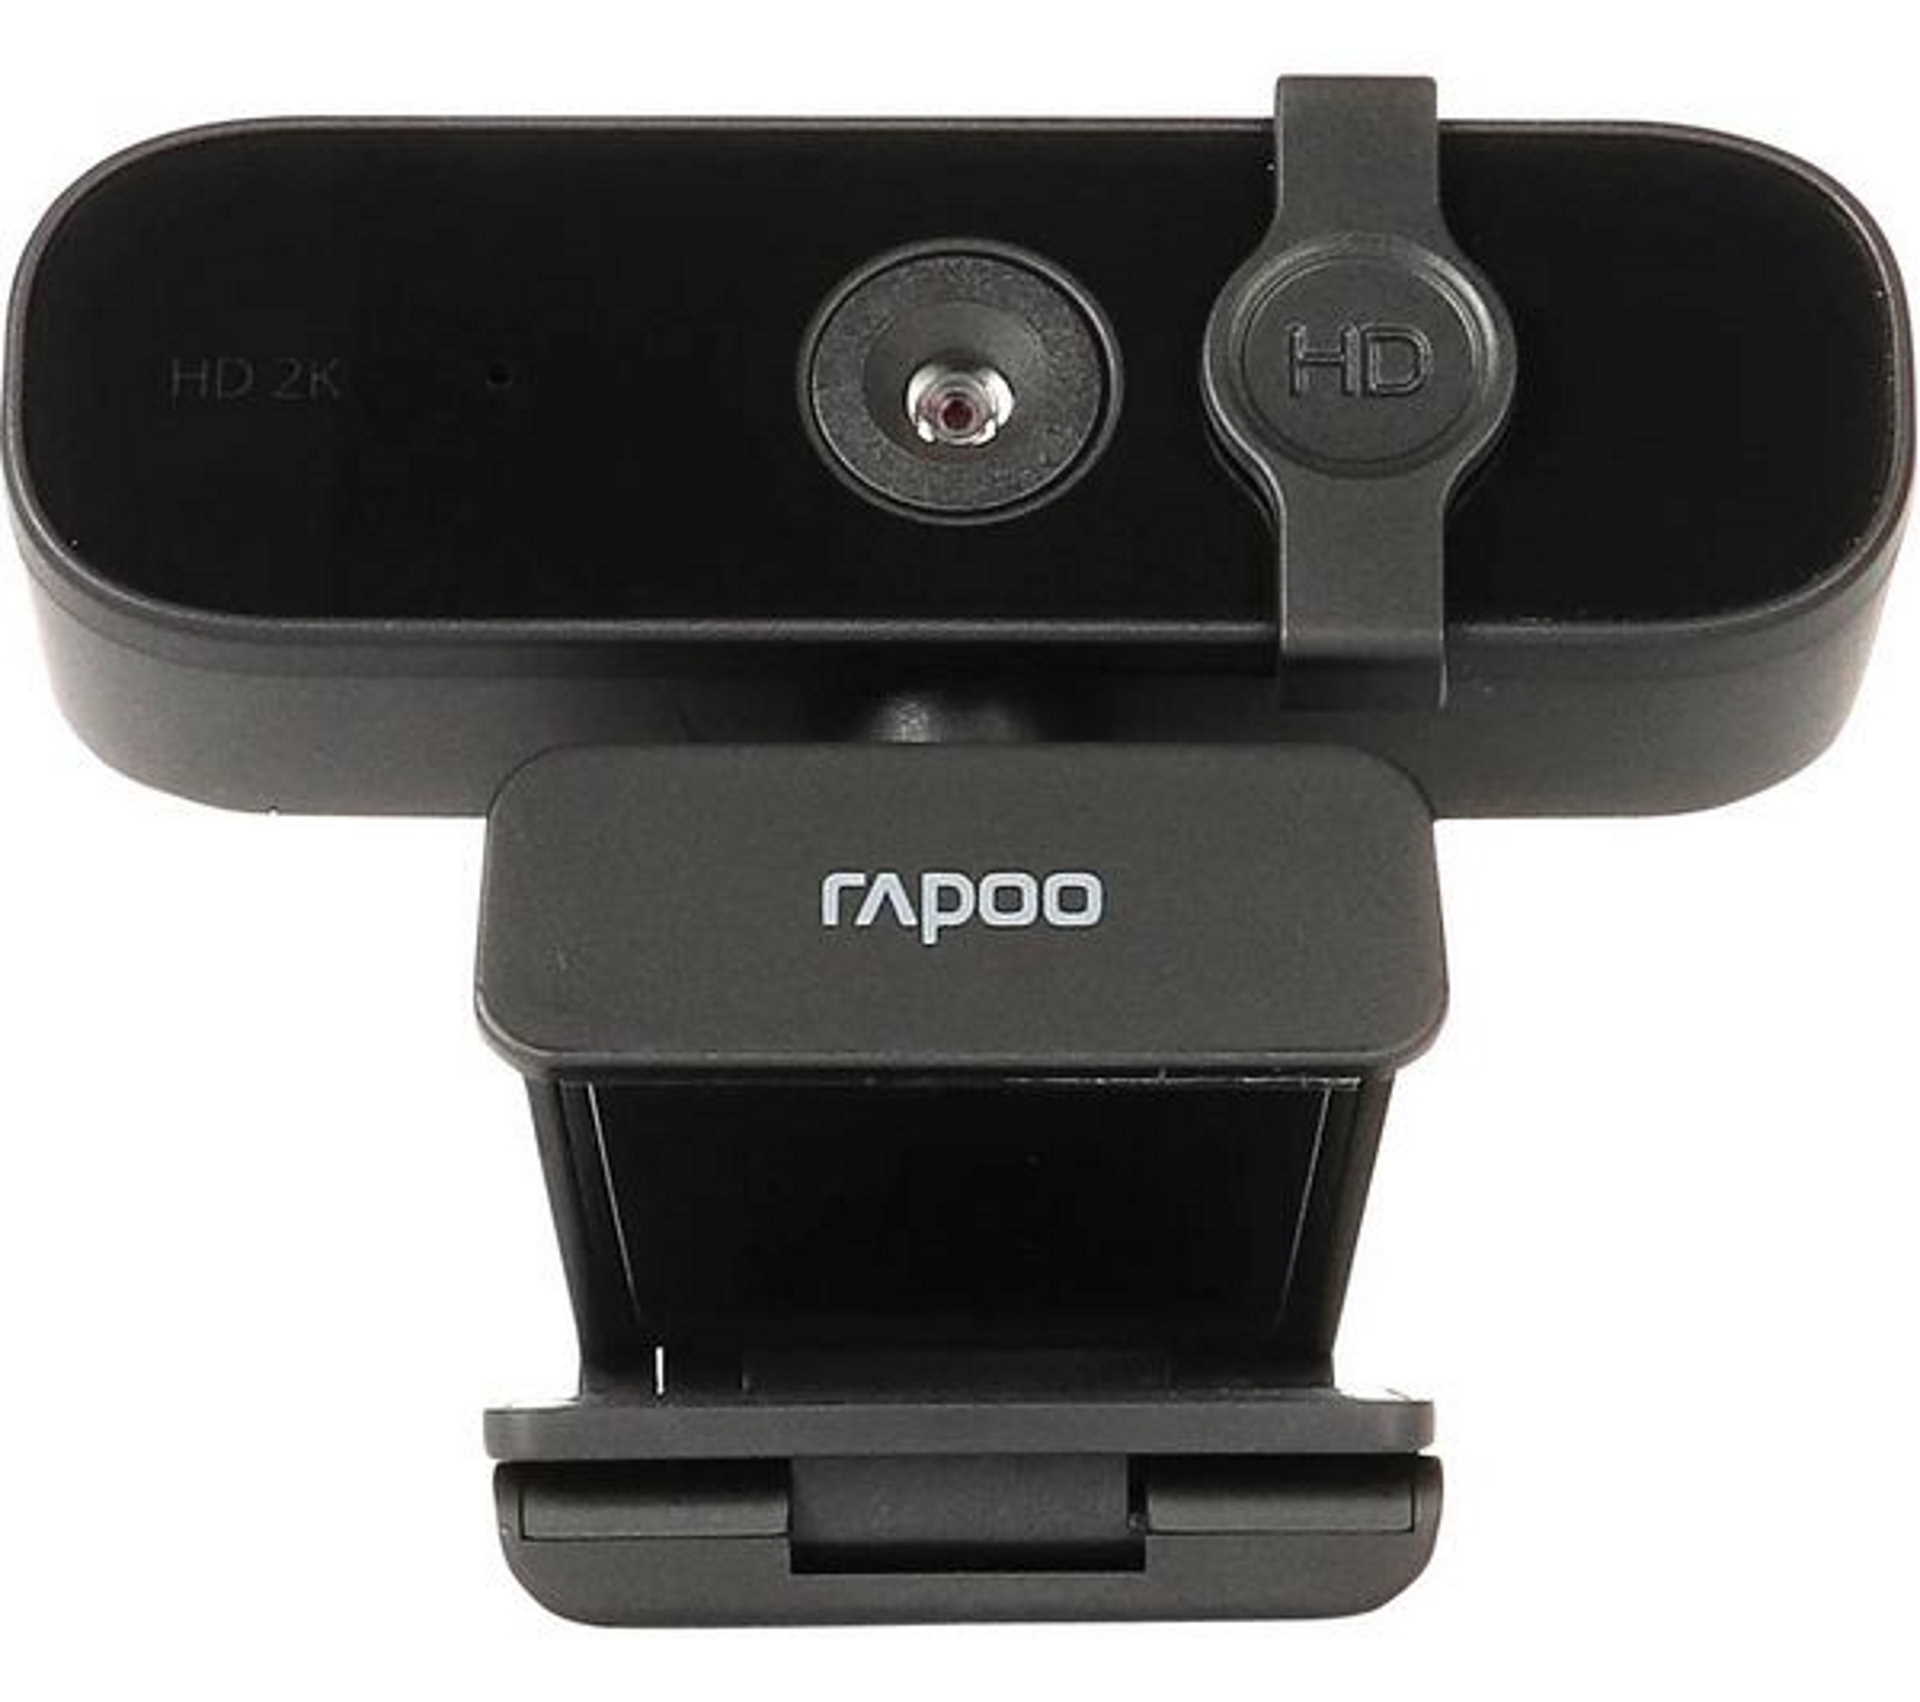 Rapoo XW170, XW180, and XW2K serious in entries are the world webcam